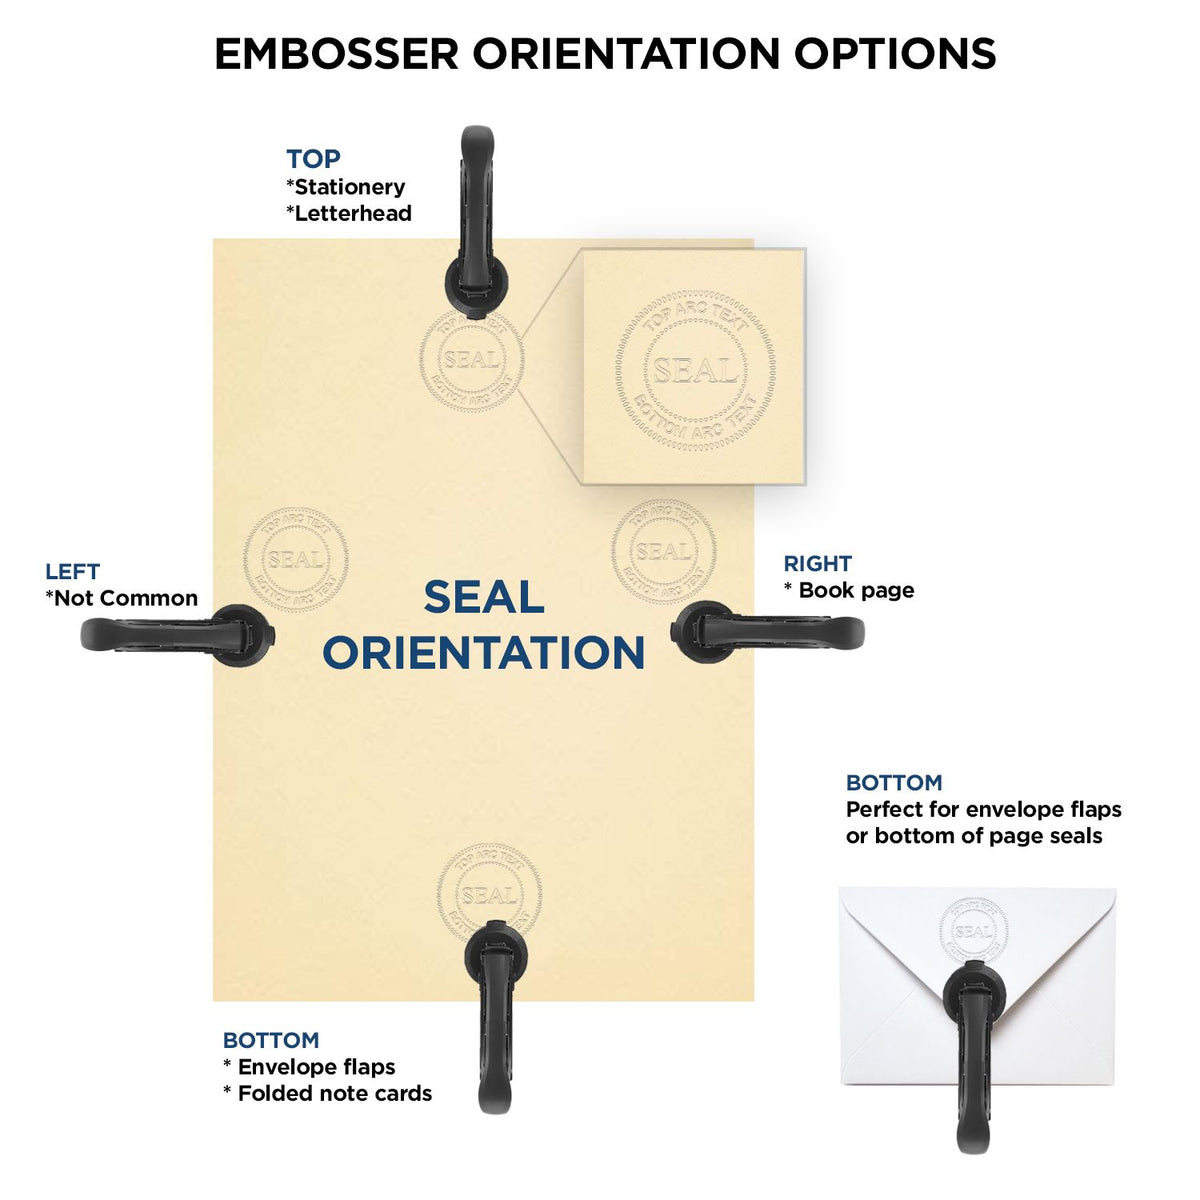 An infographic for the State of Michigan Extended Long Reach Geologist Seal showing embosser orientation, this is showing examples of a top, bottom, right and left insert.